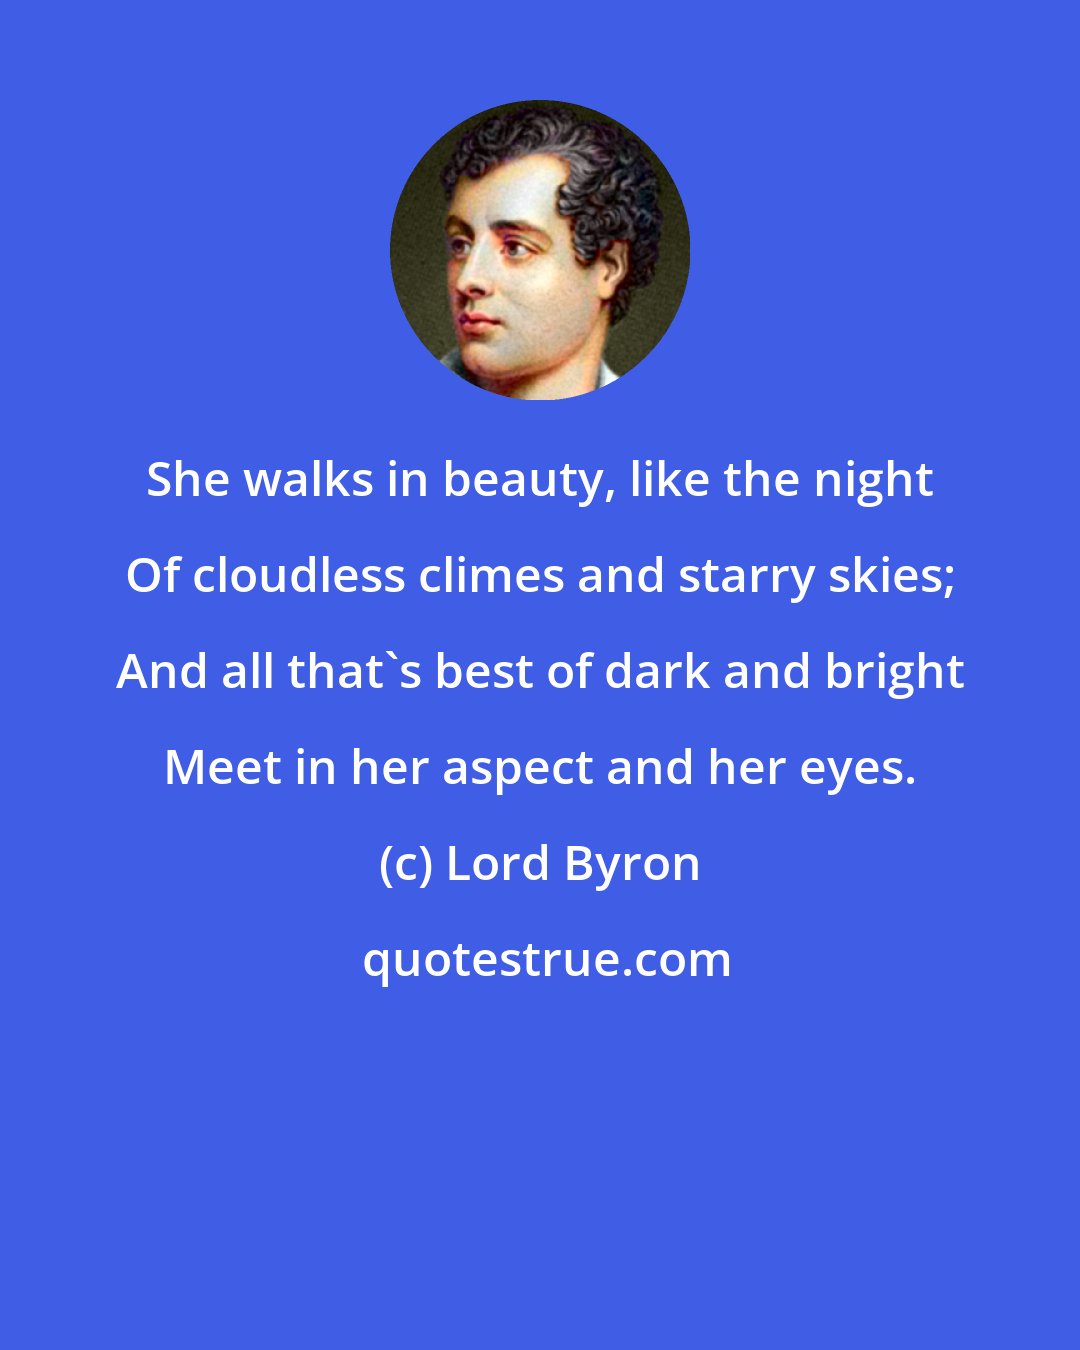 Lord Byron: She walks in beauty, like the night Of cloudless climes and starry skies; And all that's best of dark and bright Meet in her aspect and her eyes.